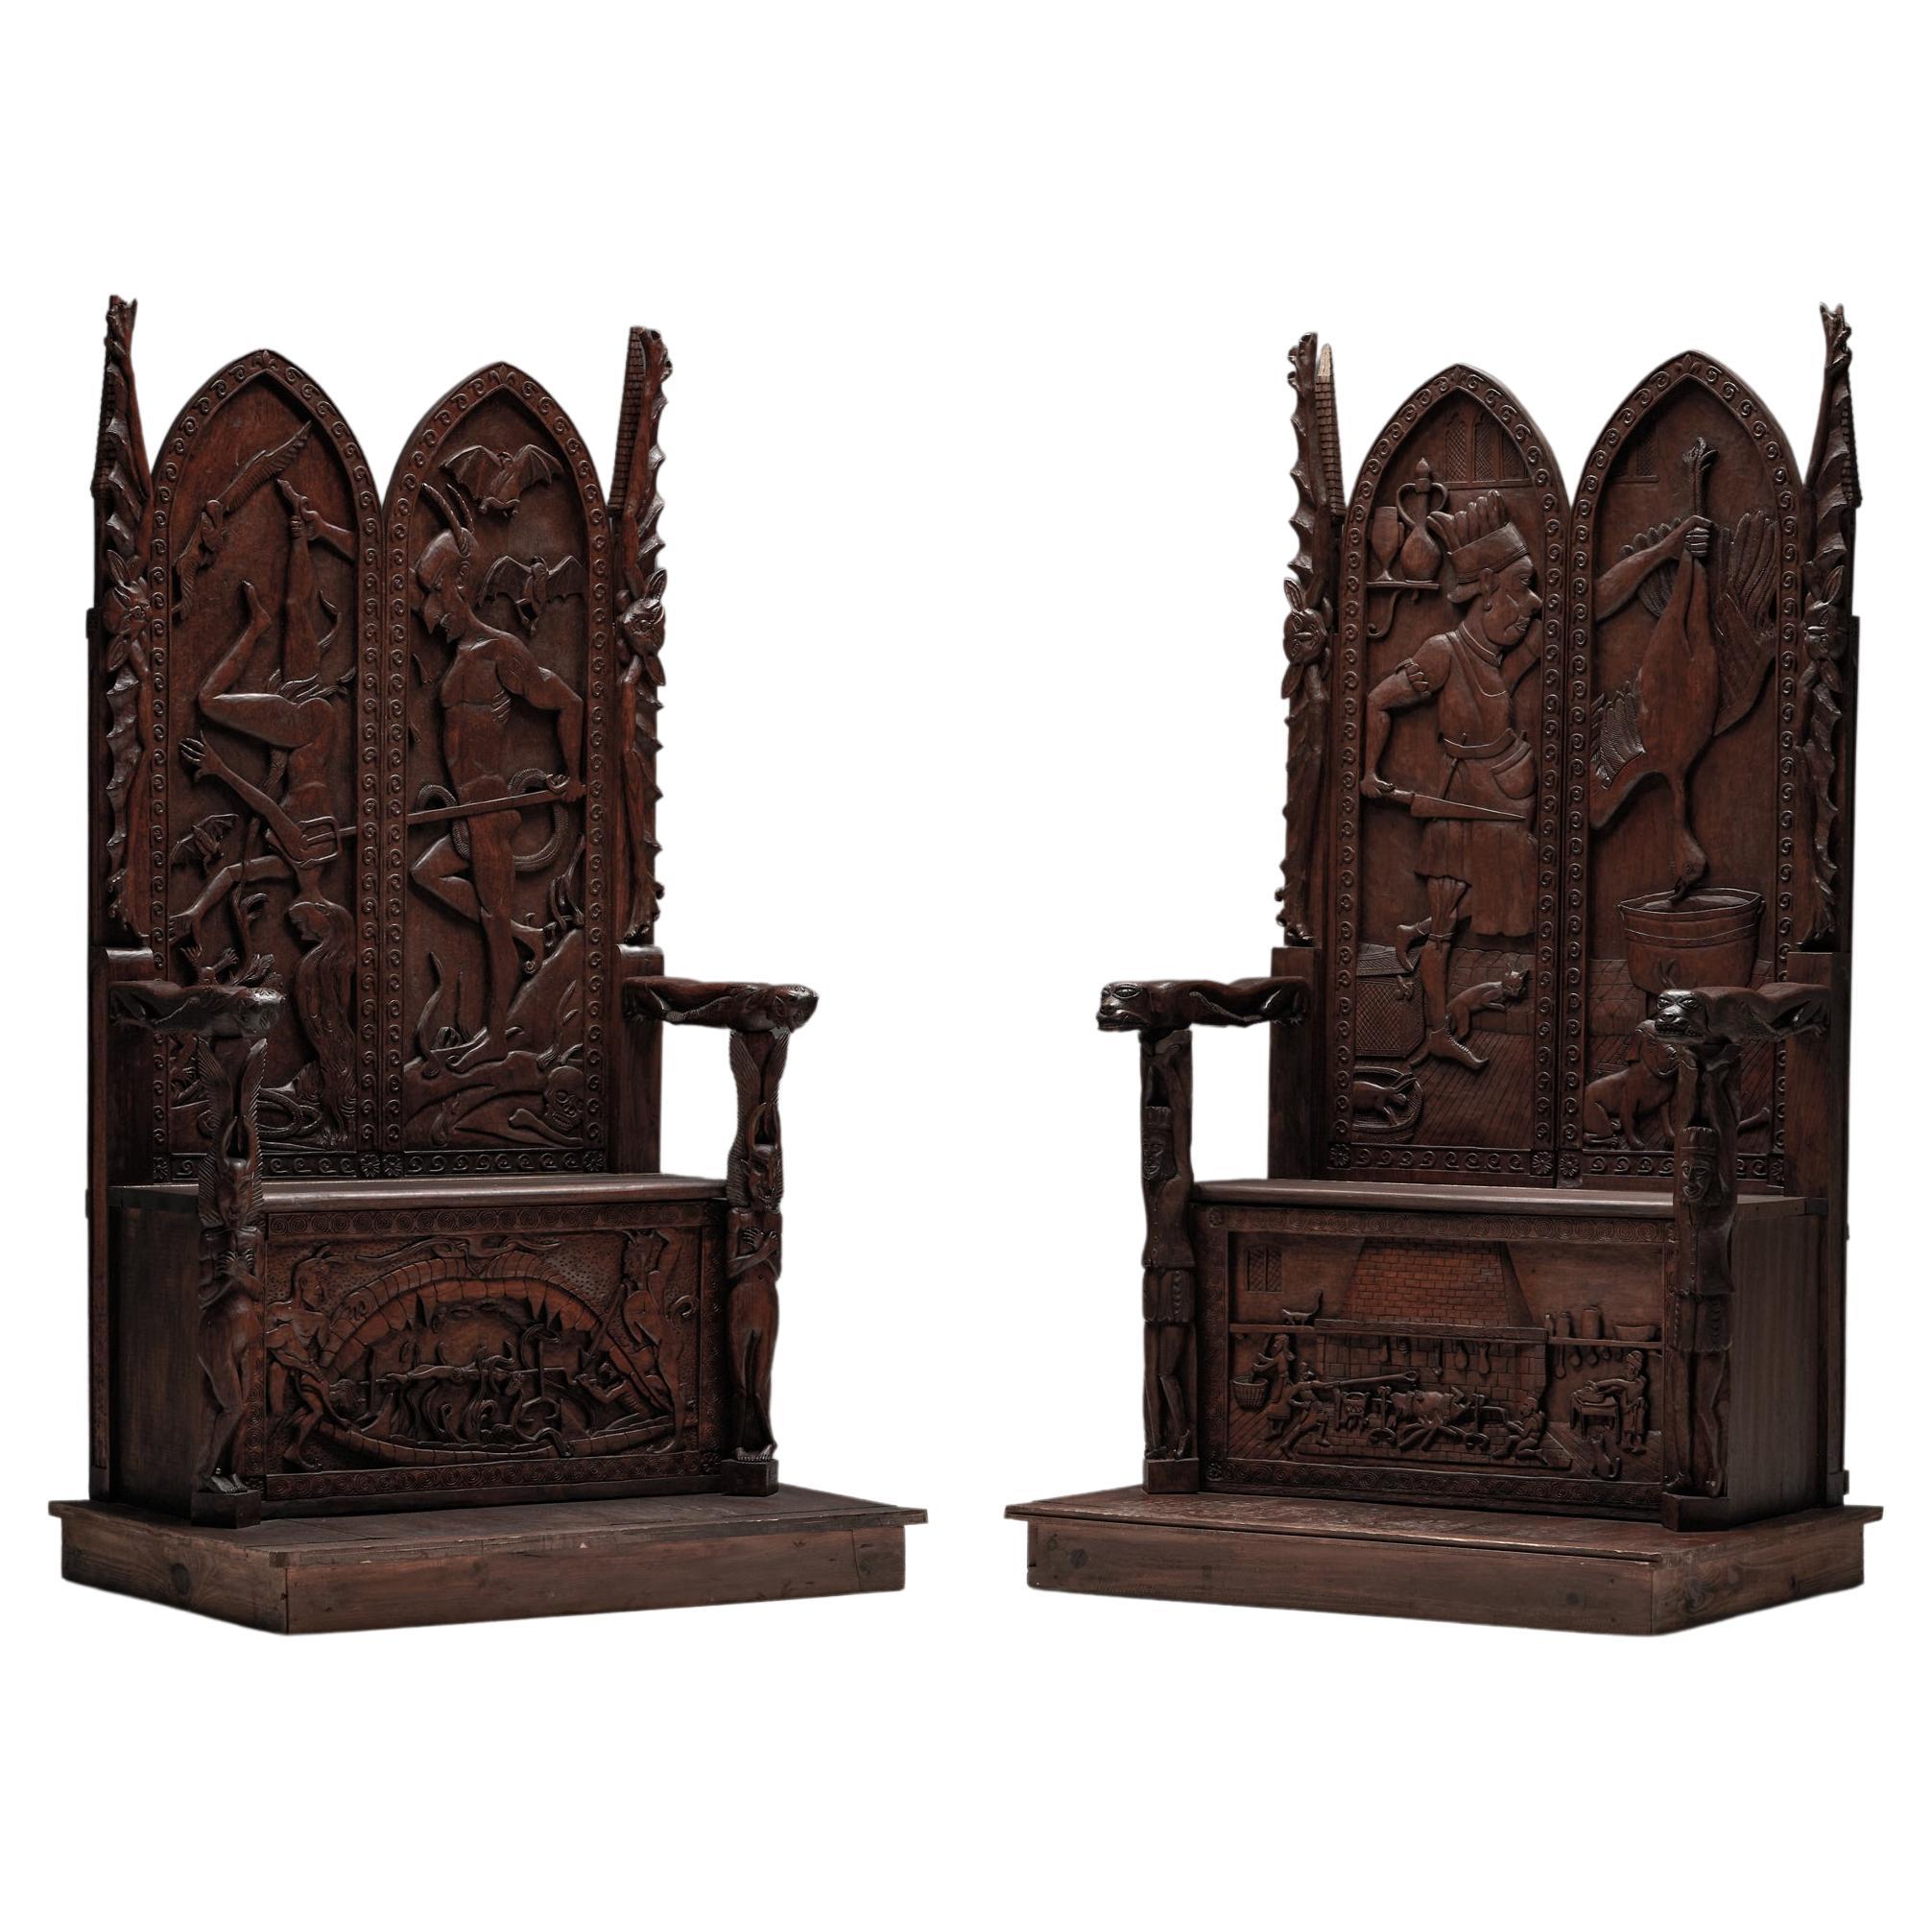 Carved Throne Chairs with Relief Design in Wood, 20th Century